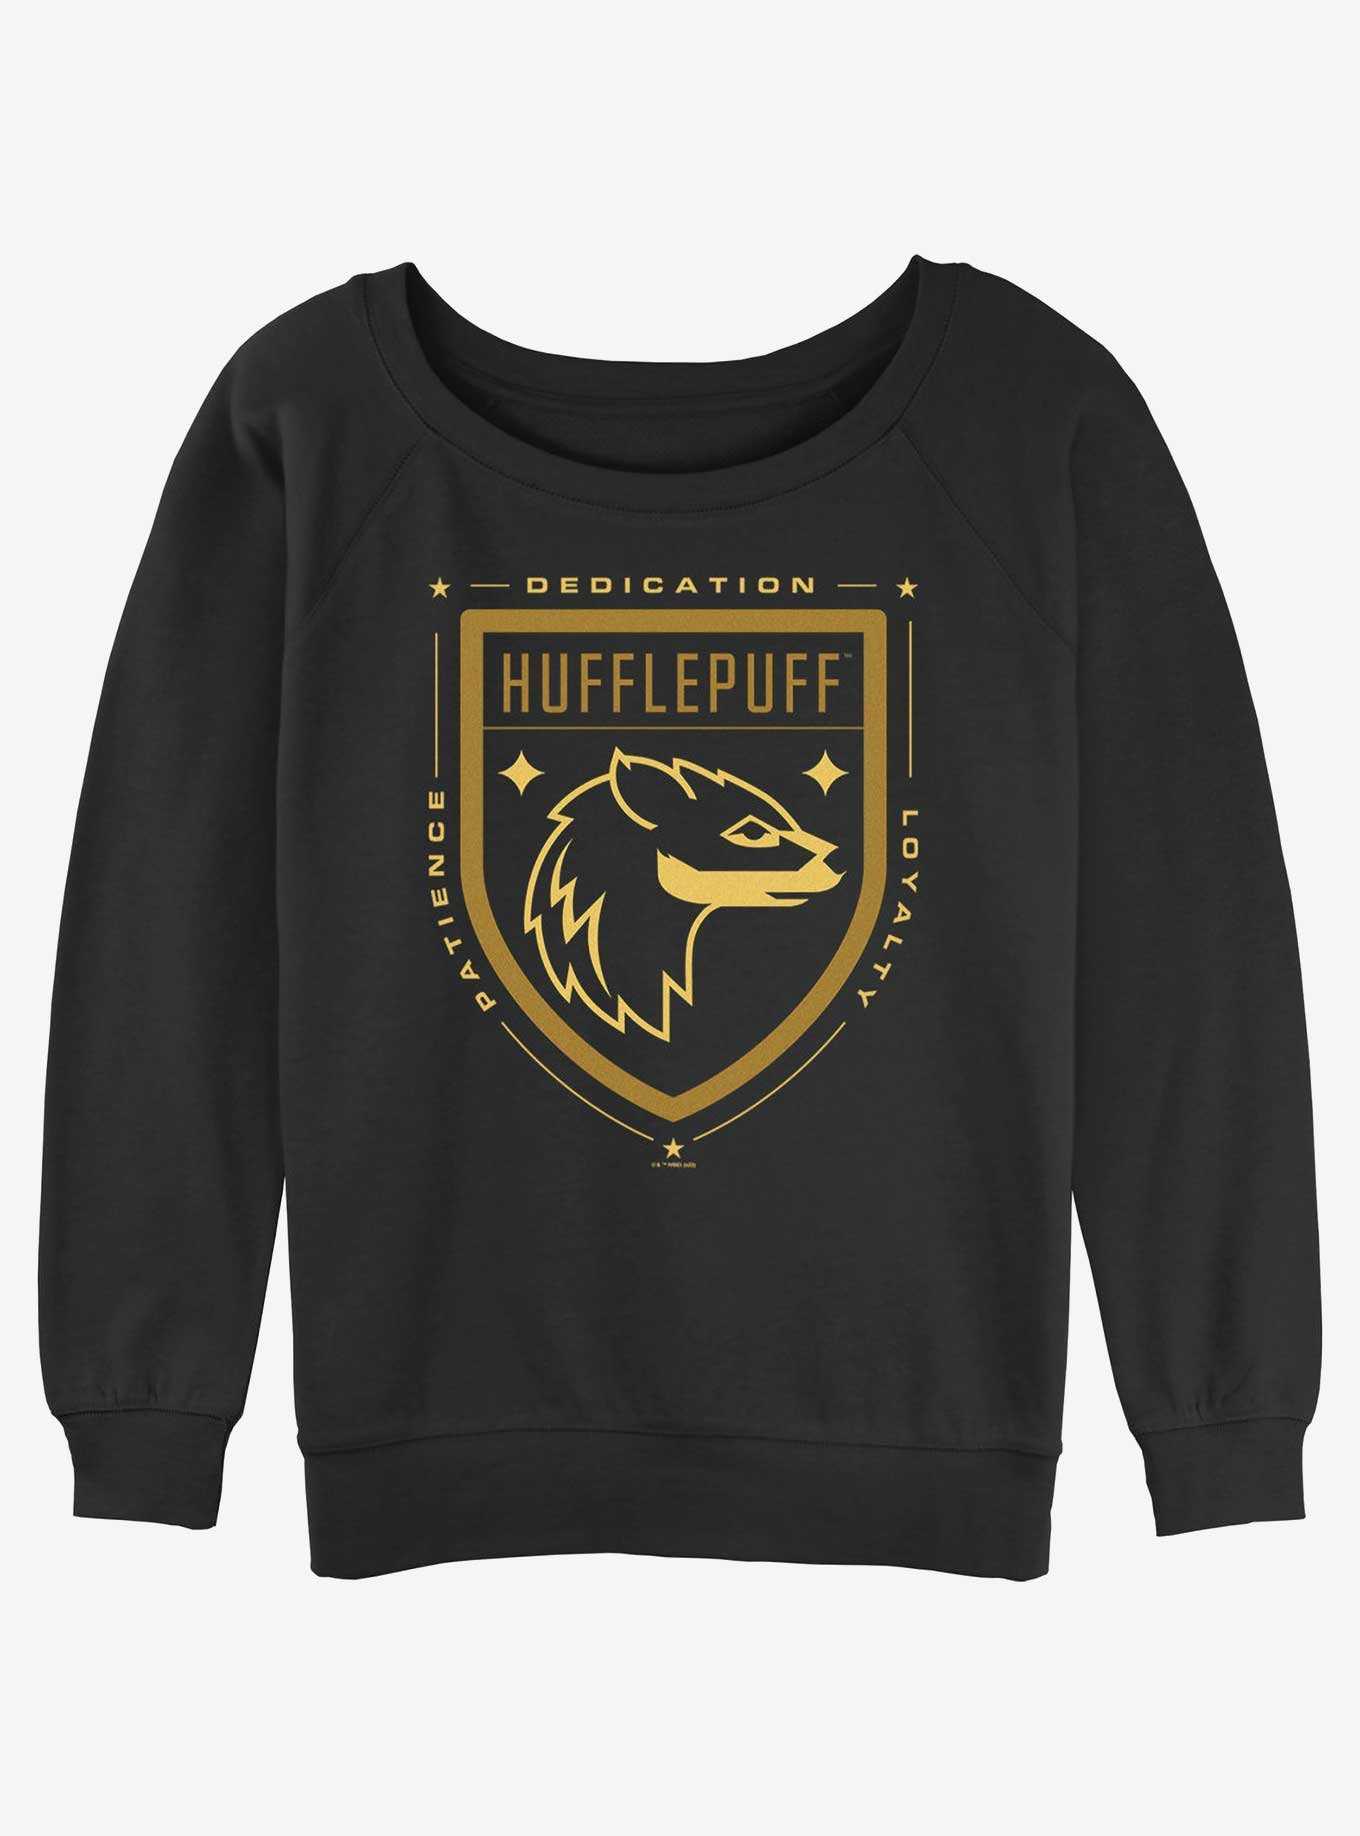 Luhivy's favorite things: Harry Potter Series : Hufflepuff